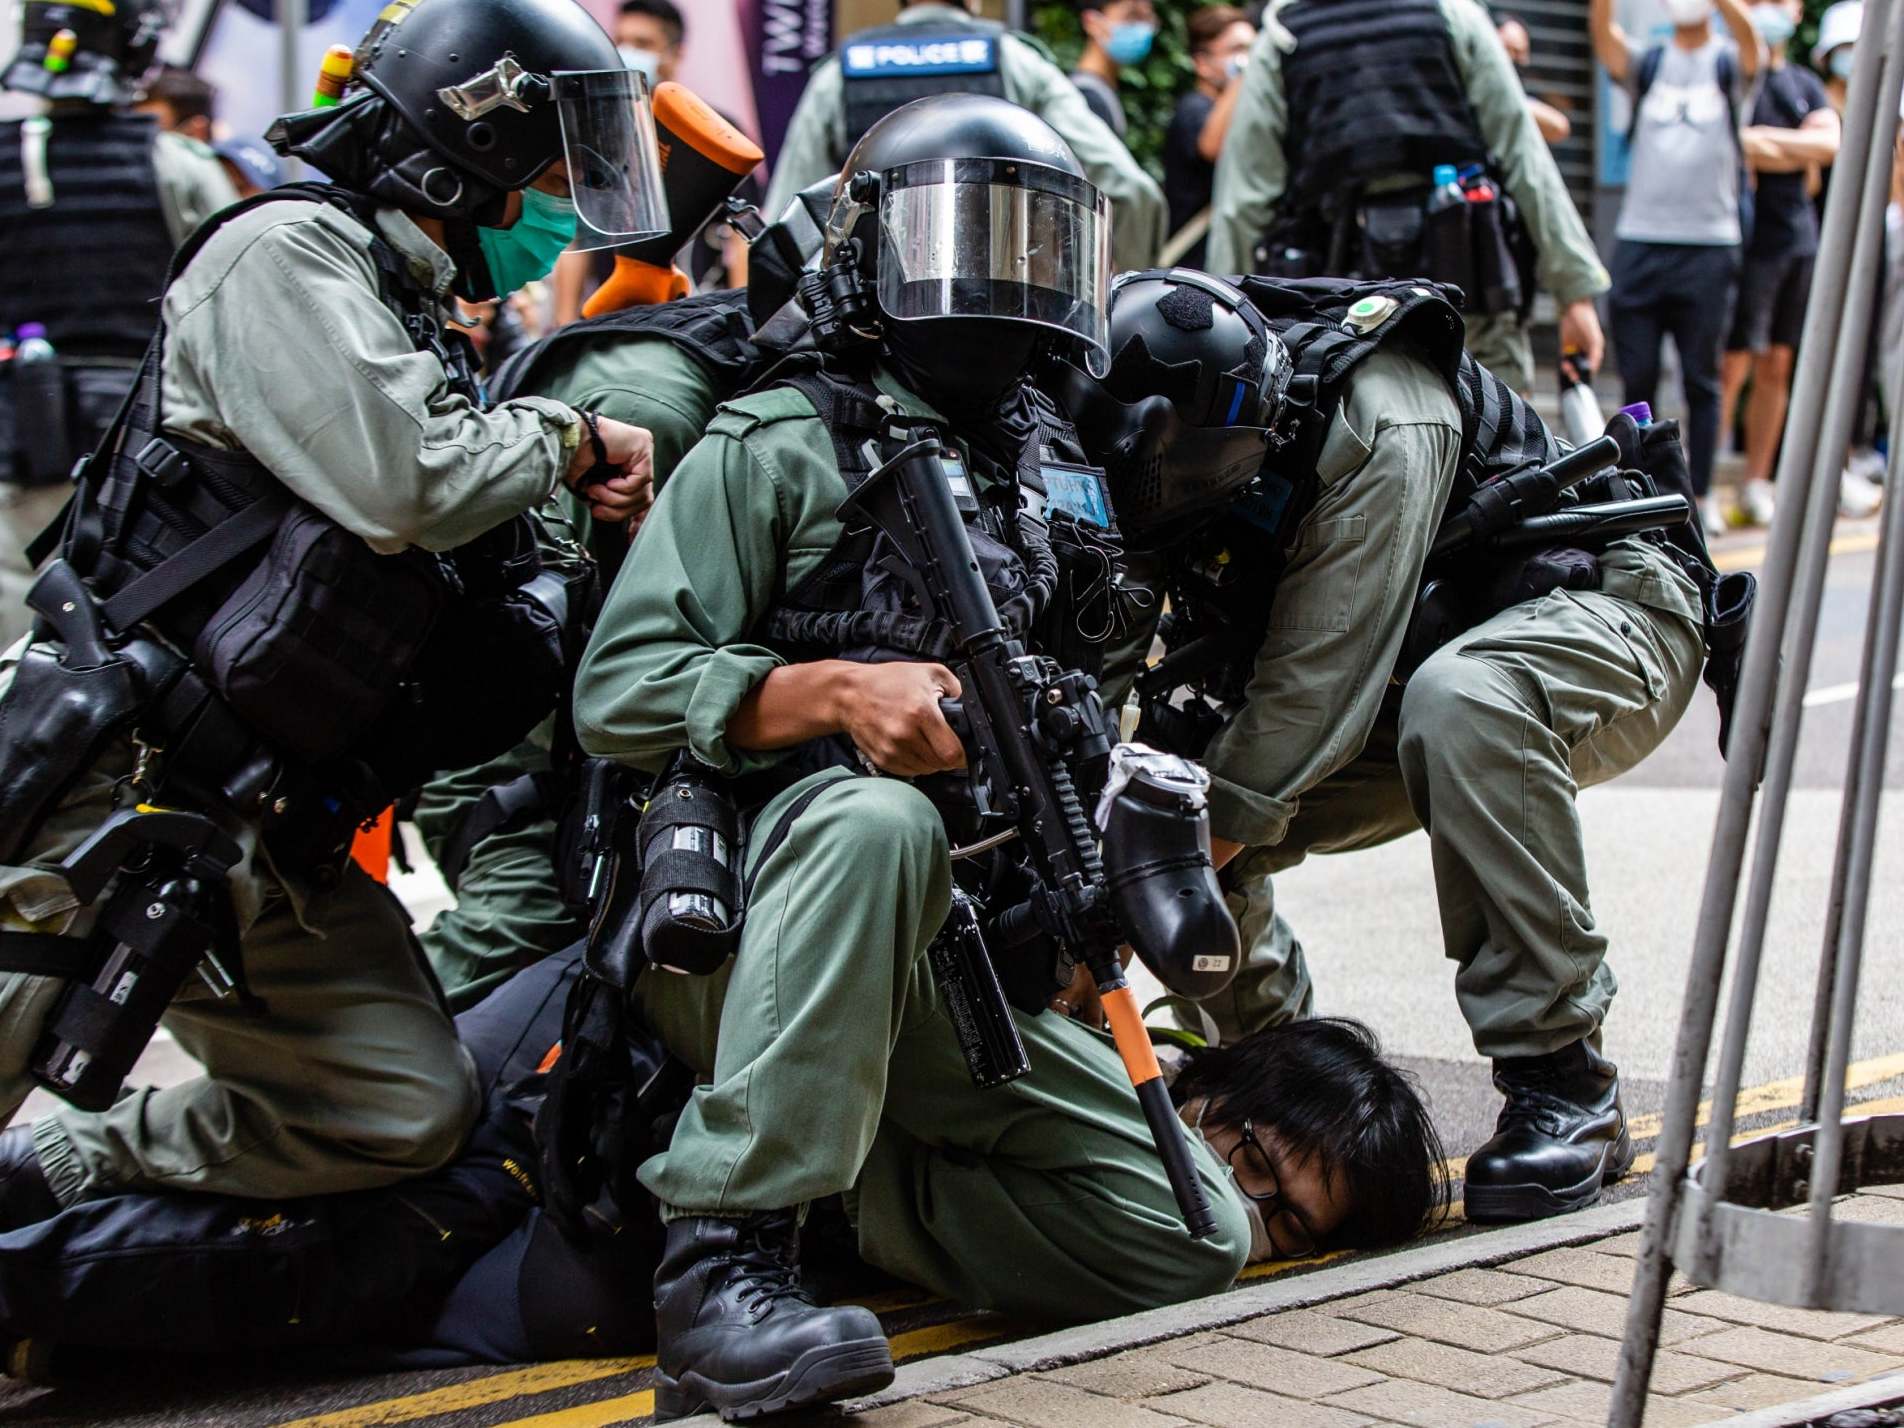 Riot police officers pin down a demonstrator in the city